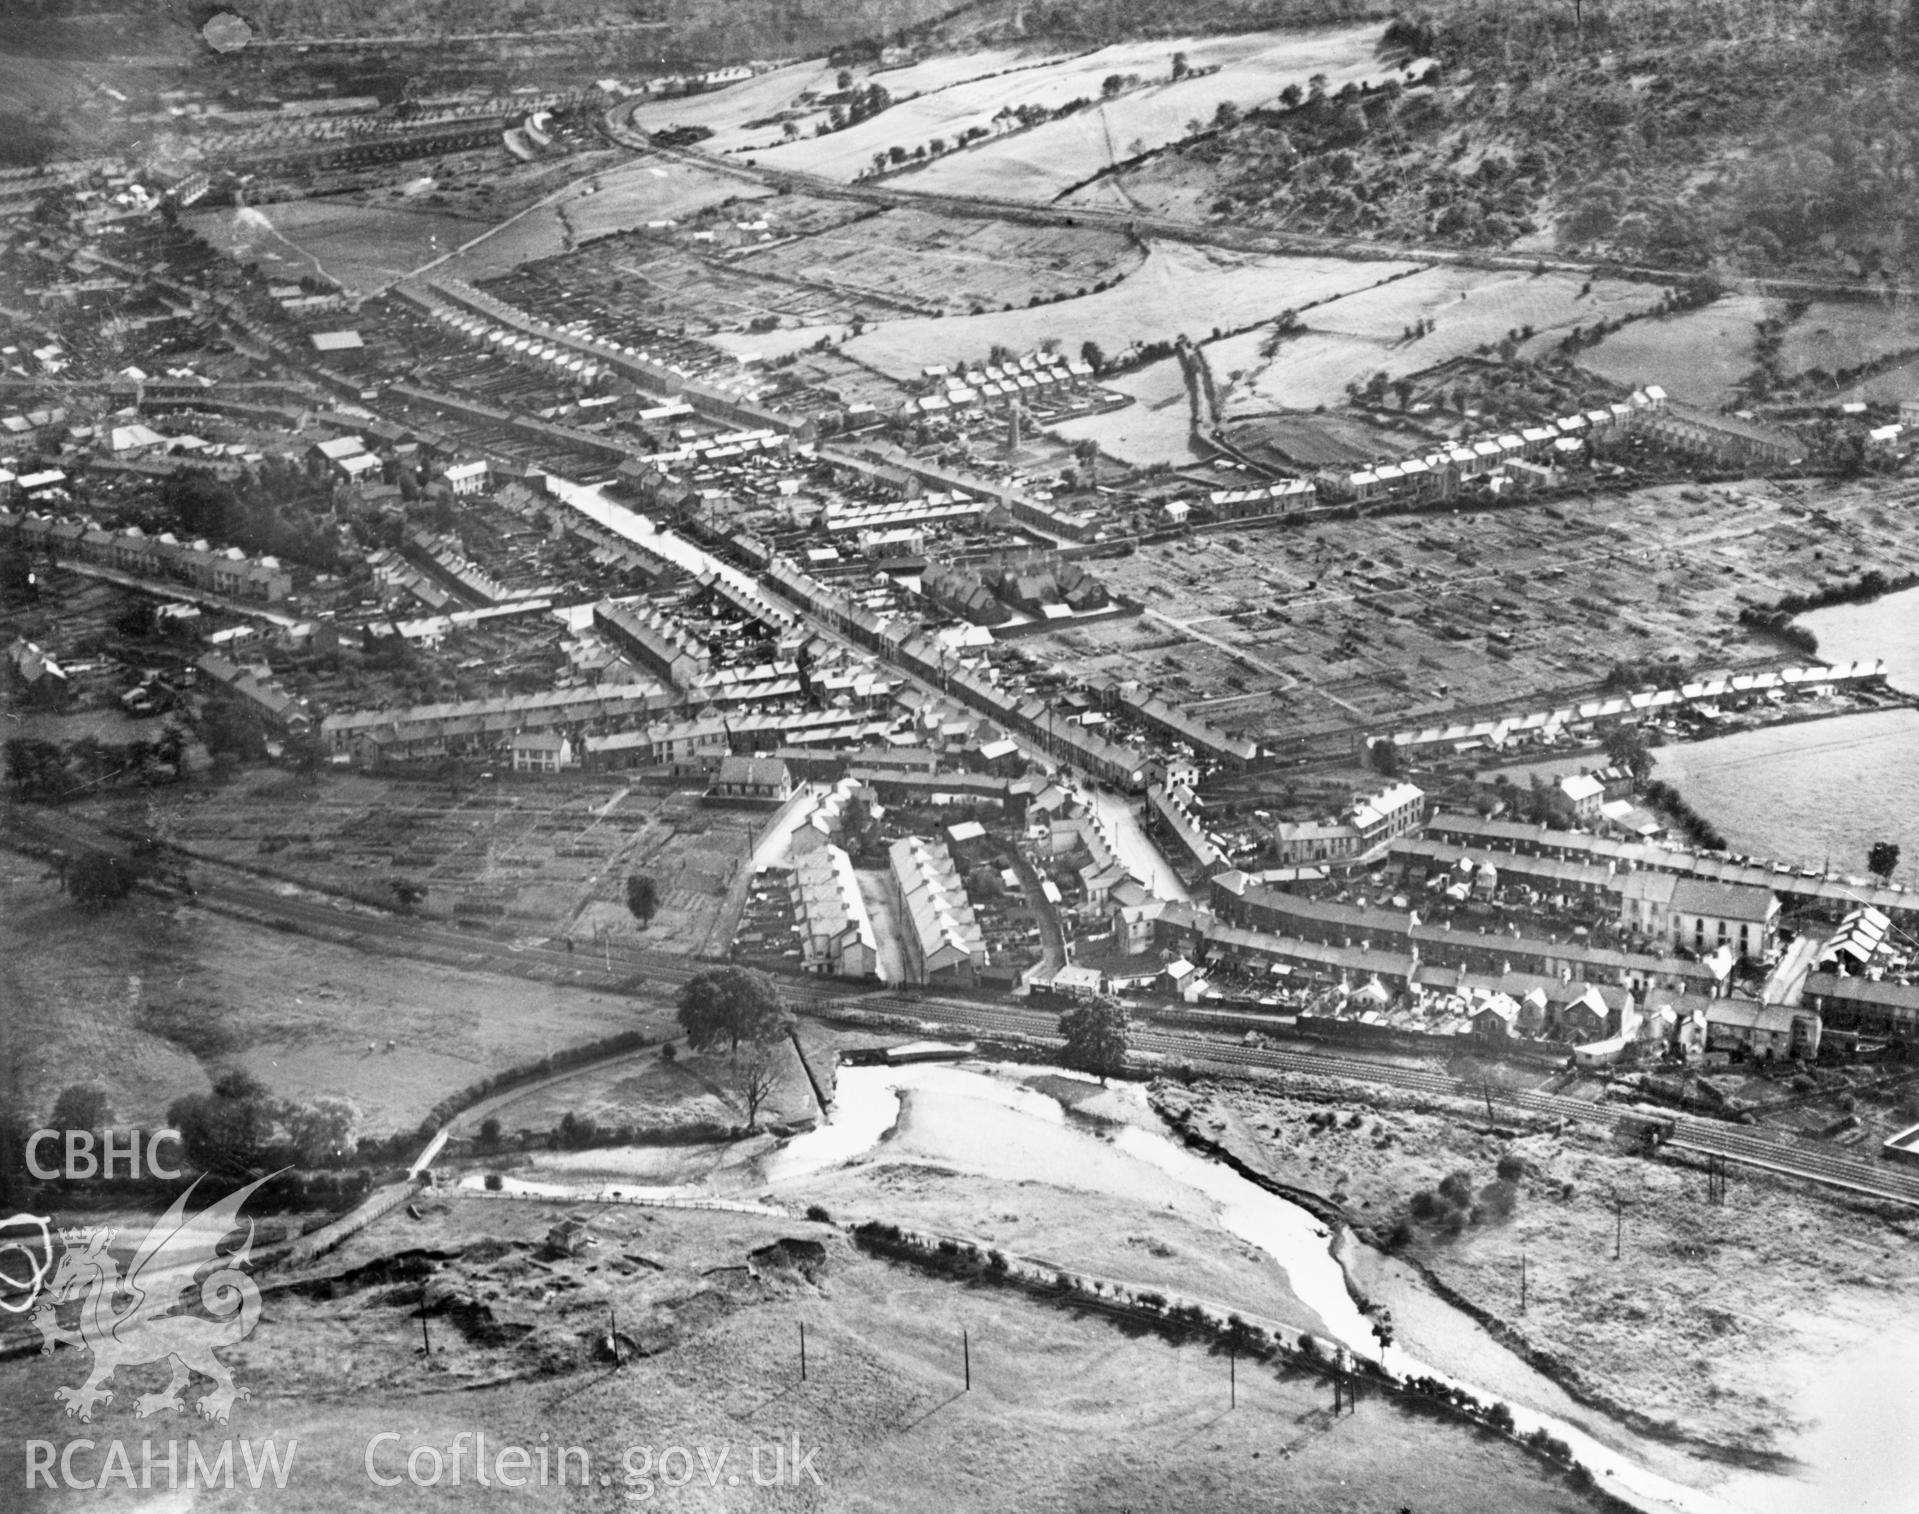 General view of Aberdare. Oblique aerial photograph, 5?x4? BW glass plate.